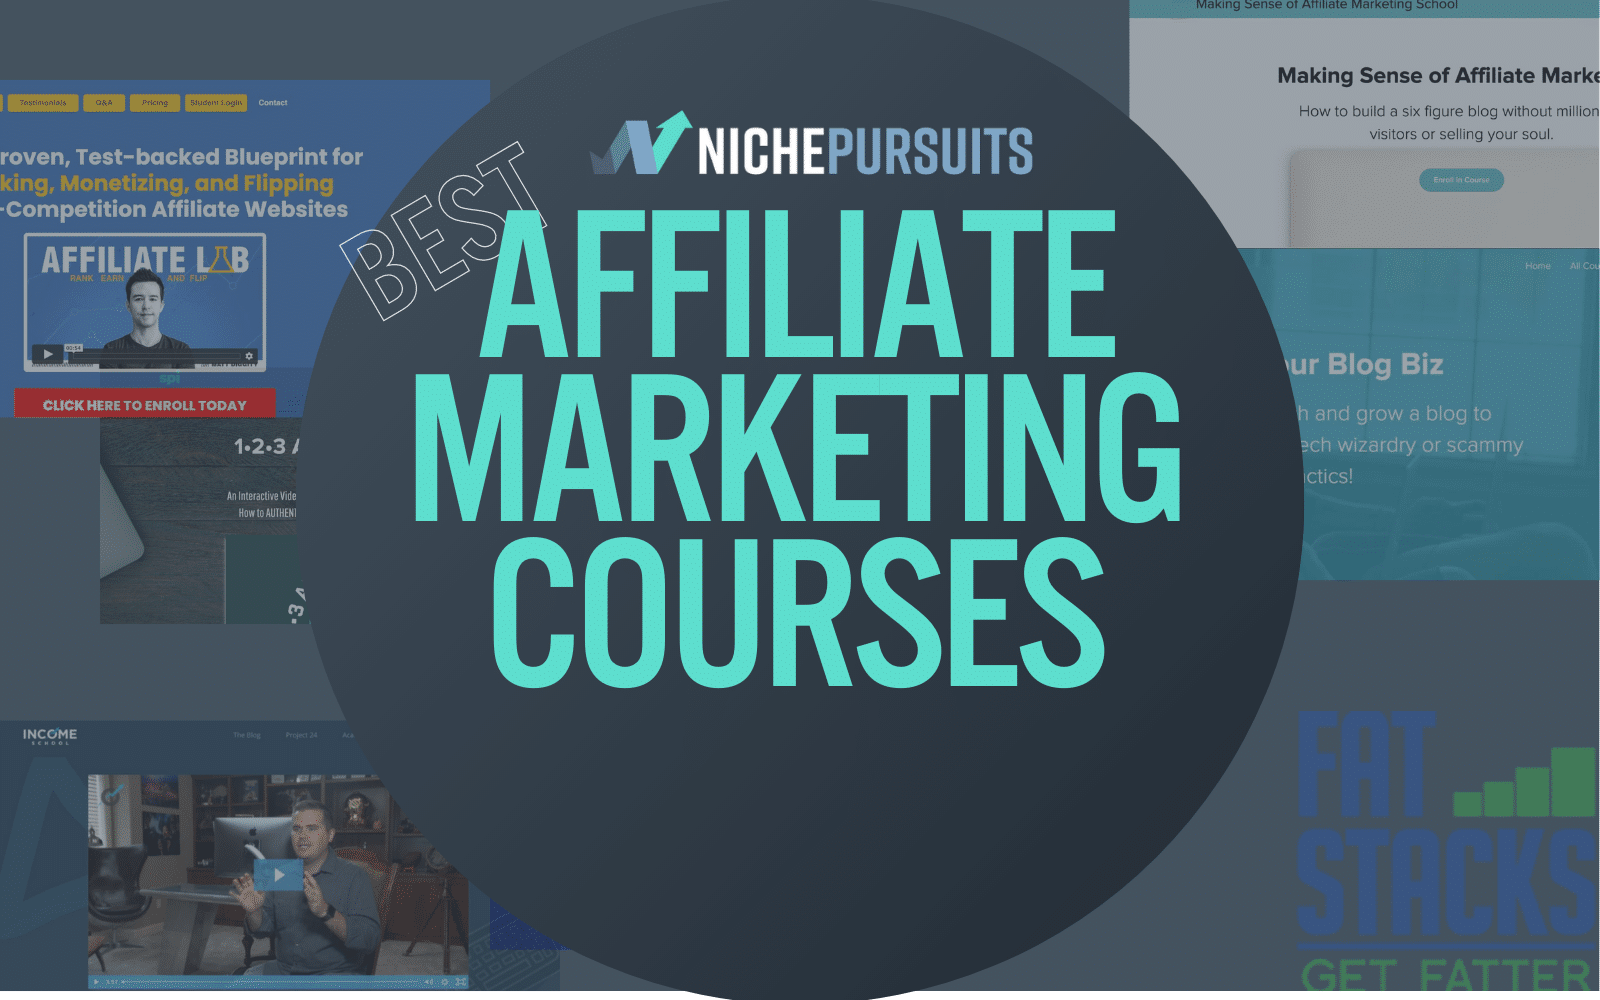 How difficult is it to earn money from affiliate marketing begining from  scratch? - Quora